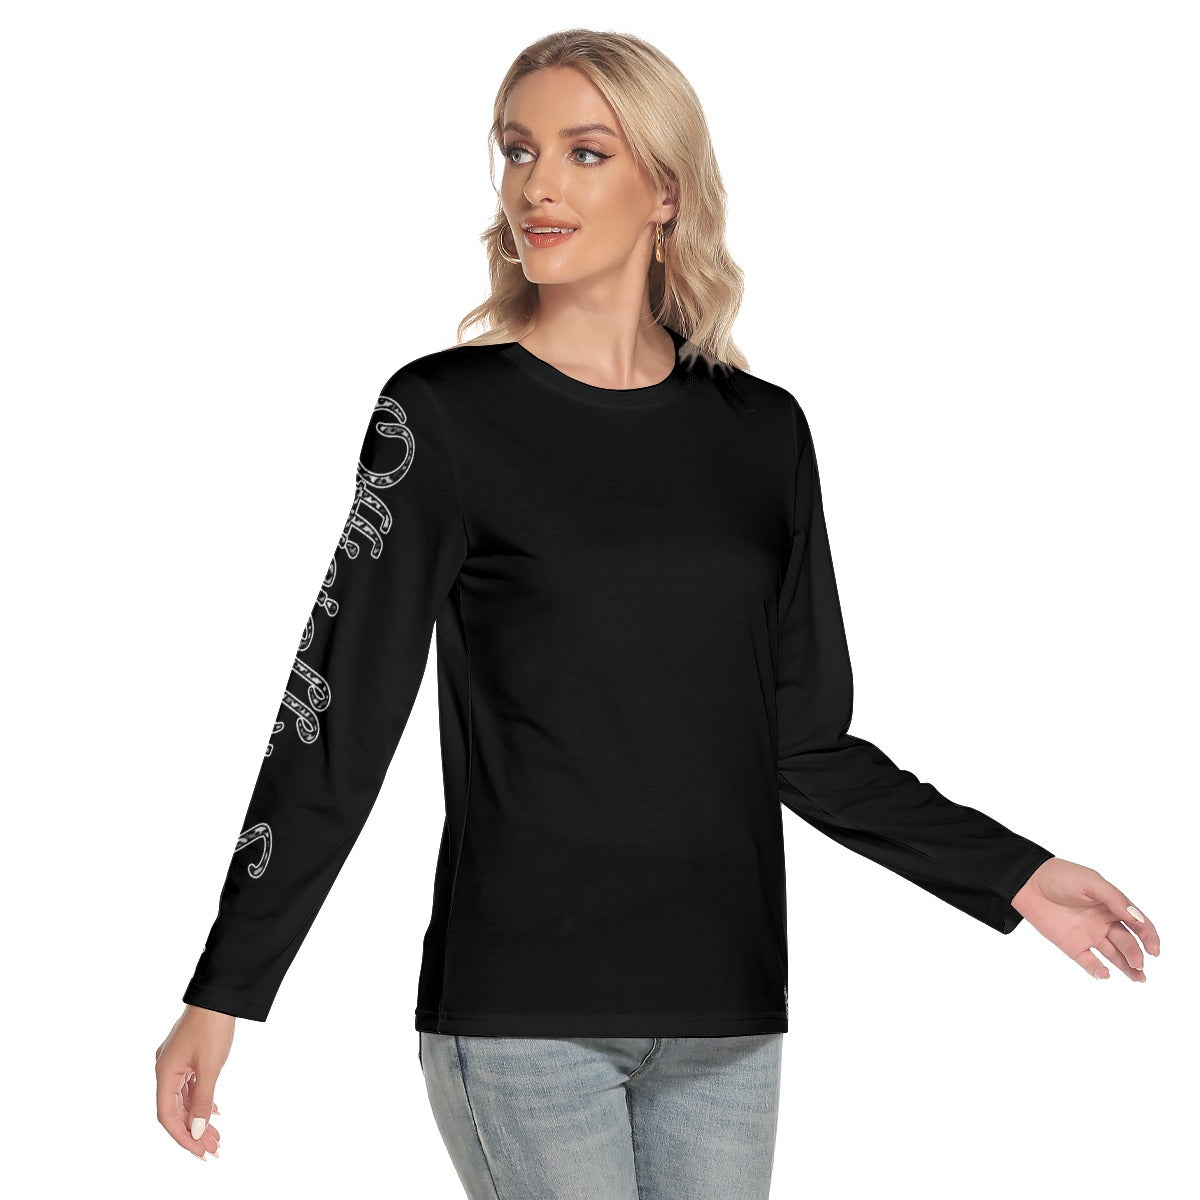 Officially Sexy Snow Leopard Print Collection Women's Black O-neck Long Sleeve T-shirt (English) 2